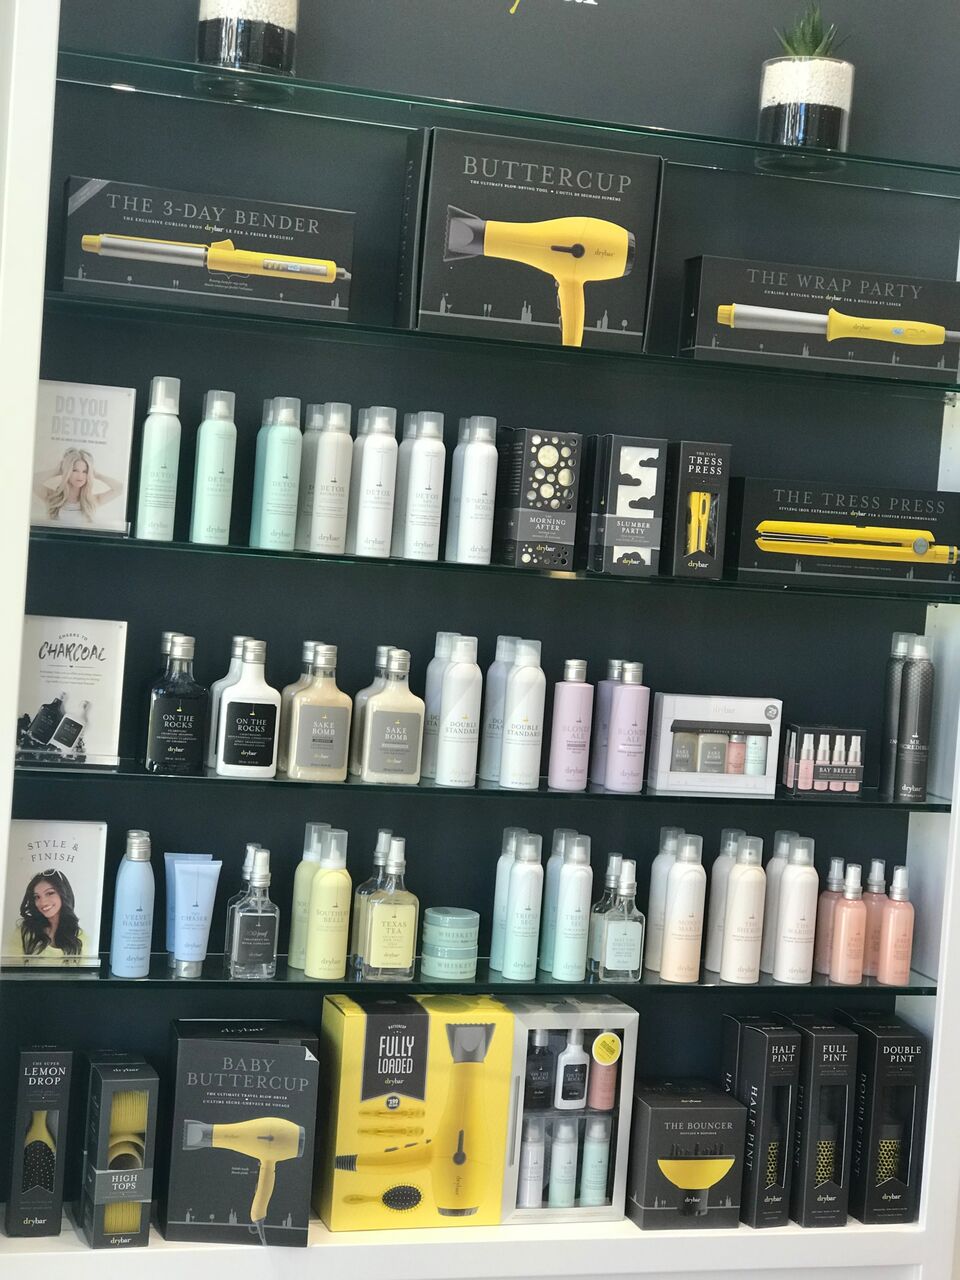 Drybar Park Meadows review featured by popular life and style Denver blogger, All Things Lovely